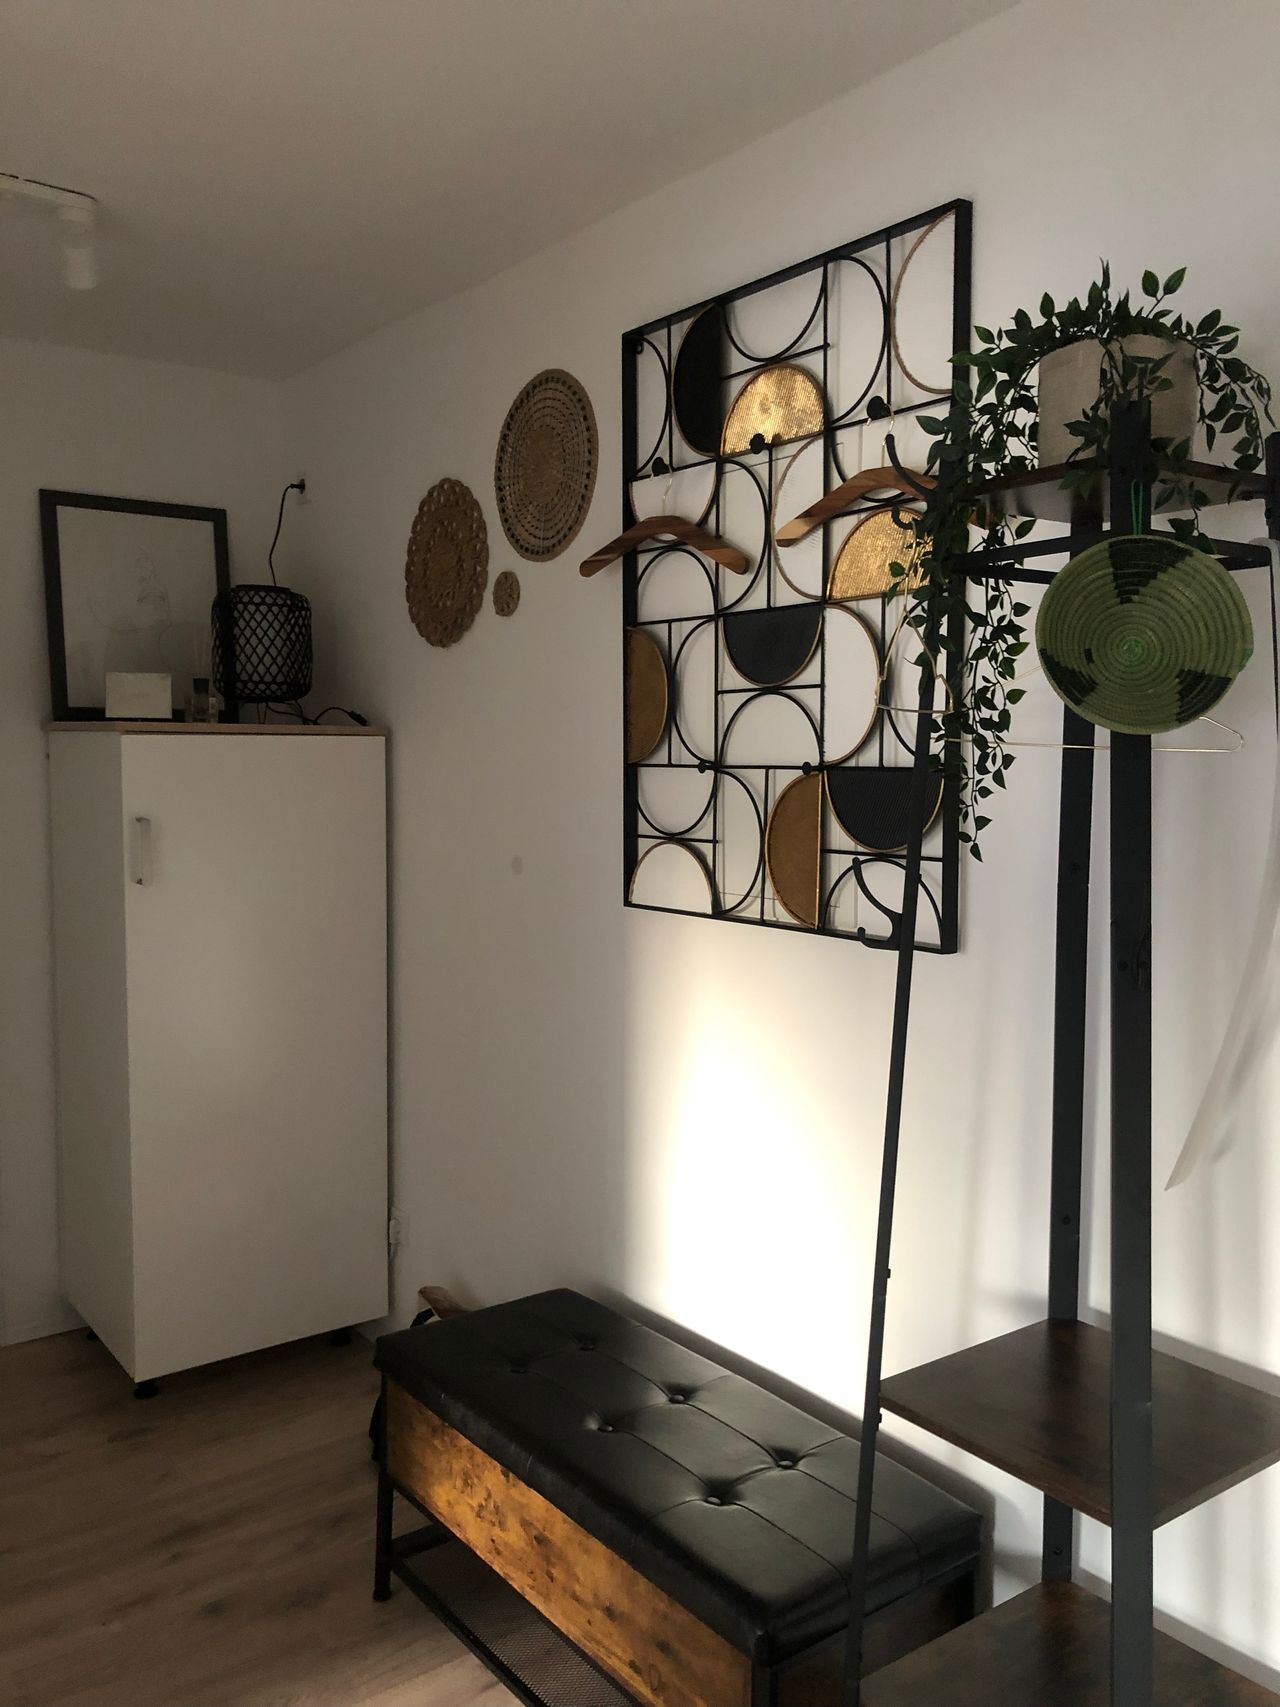 Wonderful and central apartment located in Düsseldorf